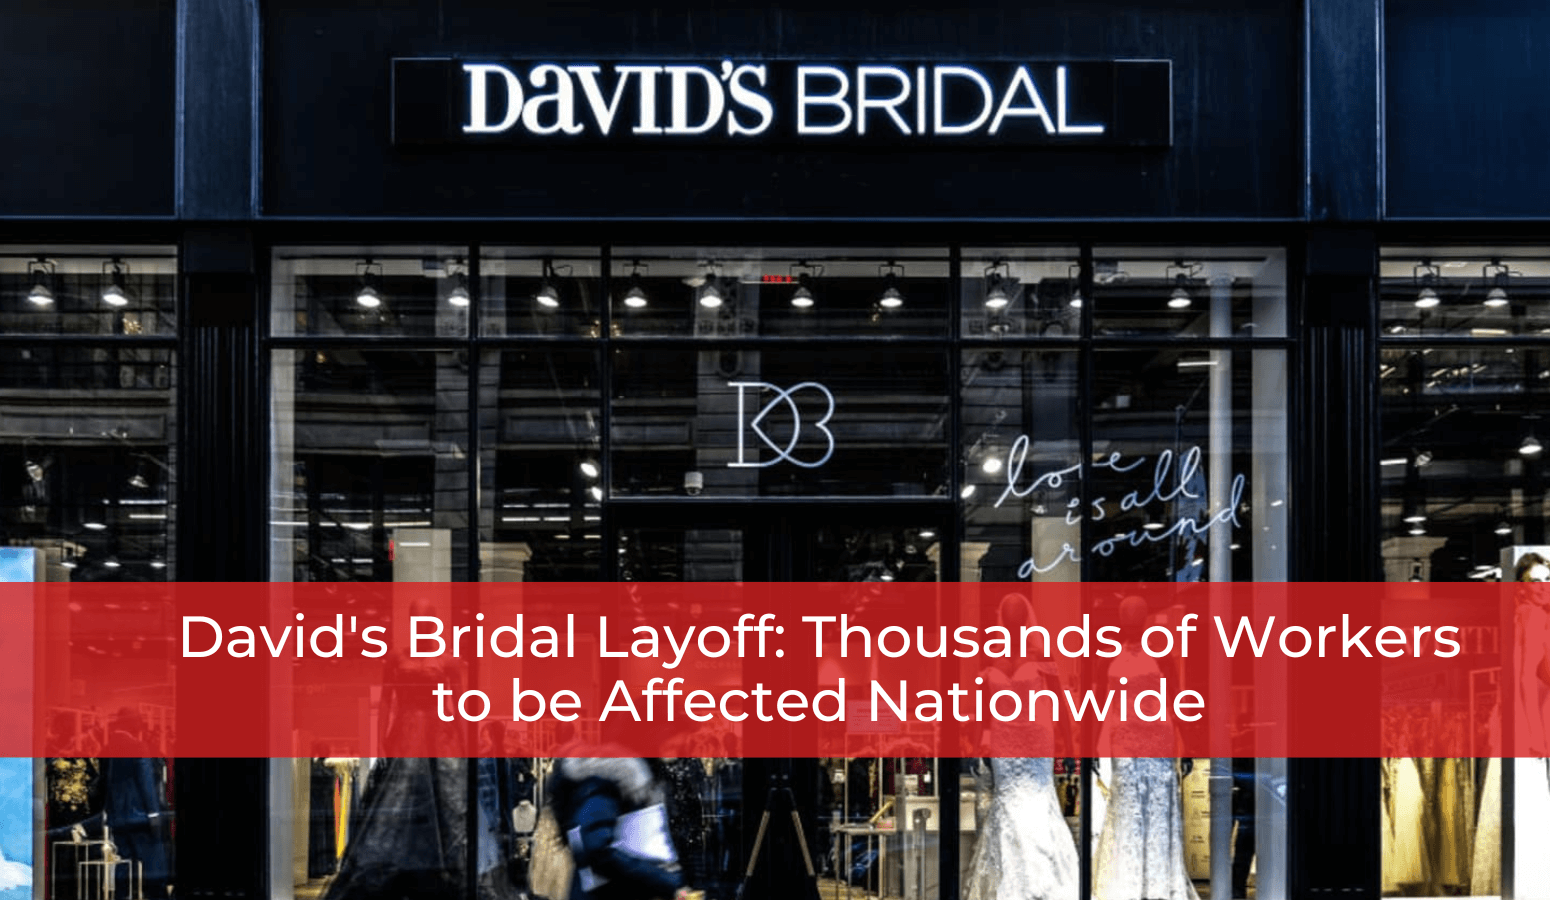 Featured image for “David’s Bridal Layoff: Thousands of Workers to be Affected”